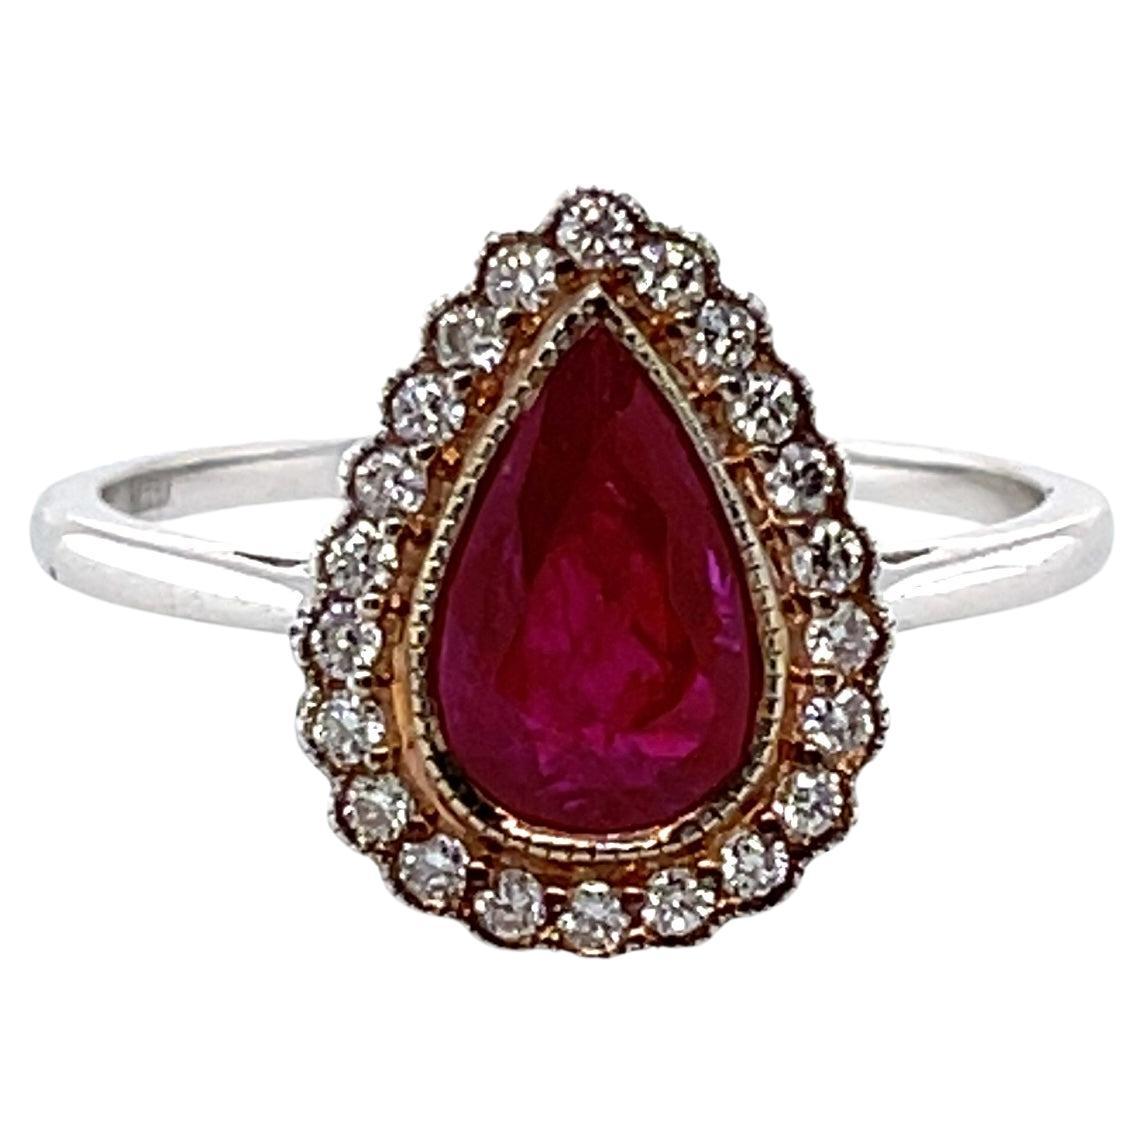 For Sale:  Imperial Jewels 18ct White and Rose Gold 'No Heat' Ruby and Diamond Ring